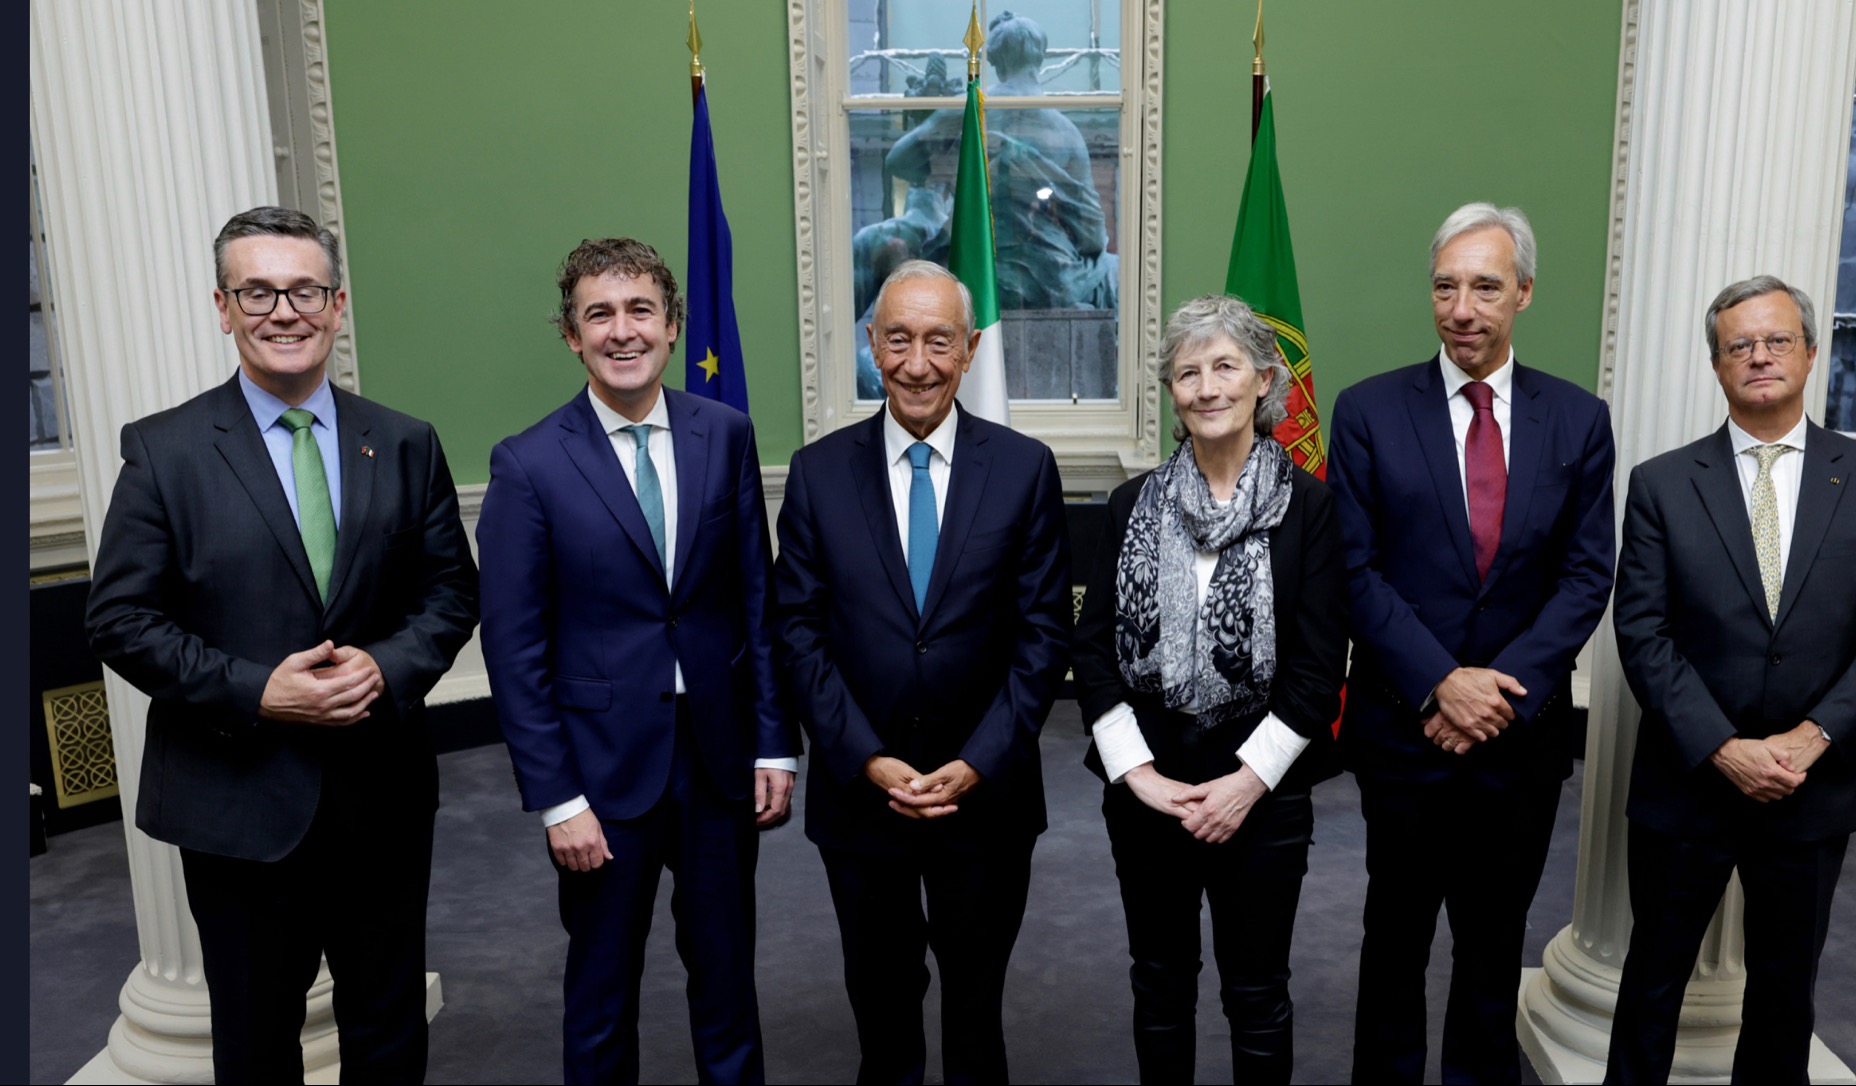 Colour photograph of Portuguese President Marcelo Rebelo de Sousa accompanied by the Cathaoirleach and Leas-Cheann Comhairle and other dignitaries